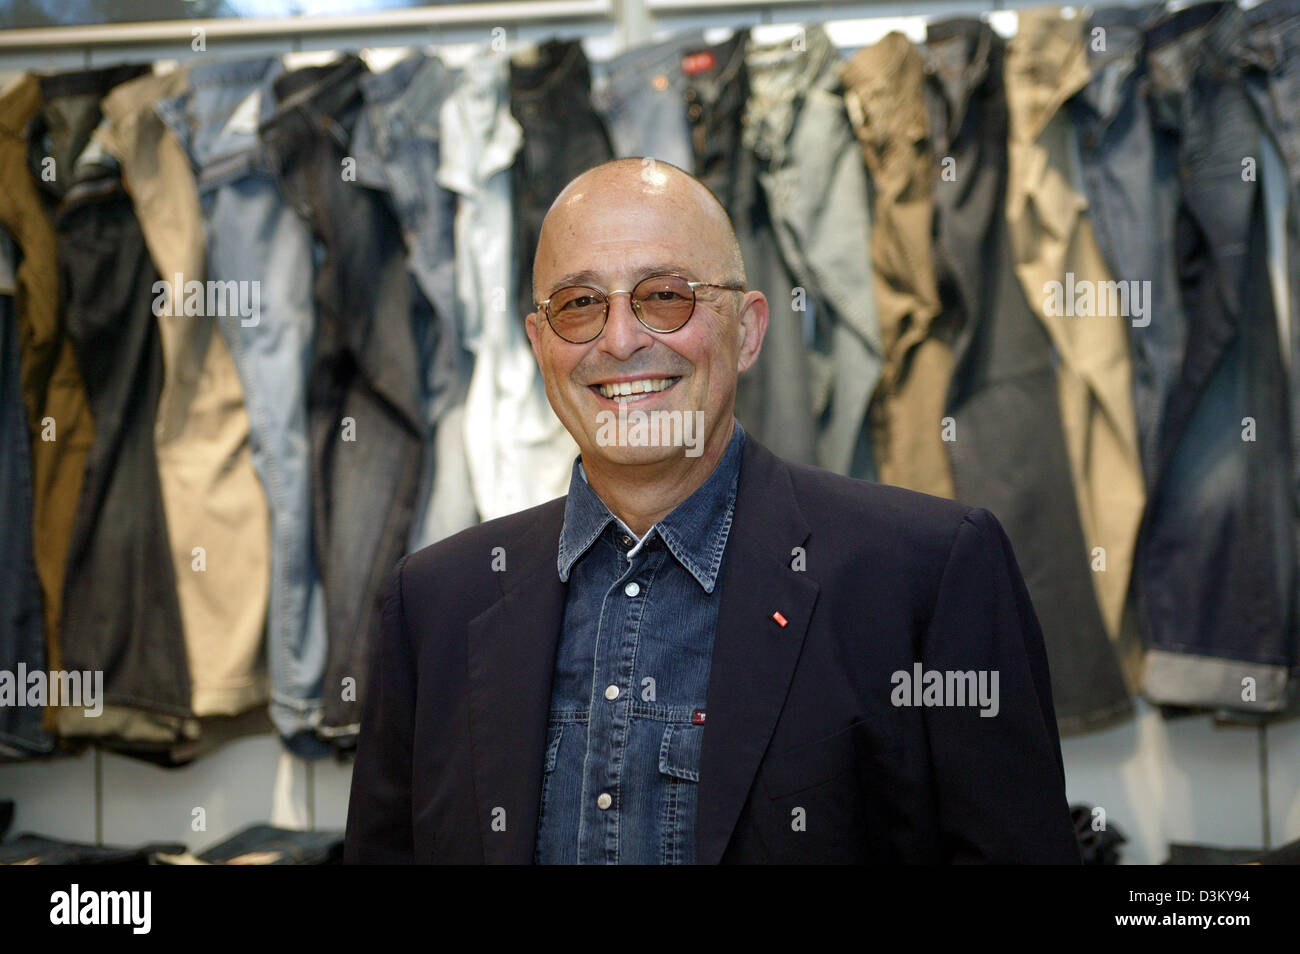 (dpa file) - Heiner Sefranek, CEO of clothing retailer Mustang, stands smiling in front of shelves of clothing of the denim brand Mustang at the company's headquarter in Kuenzelsau, Germany, 06 April 2005. Photo: Harry Melchert Stock Photo